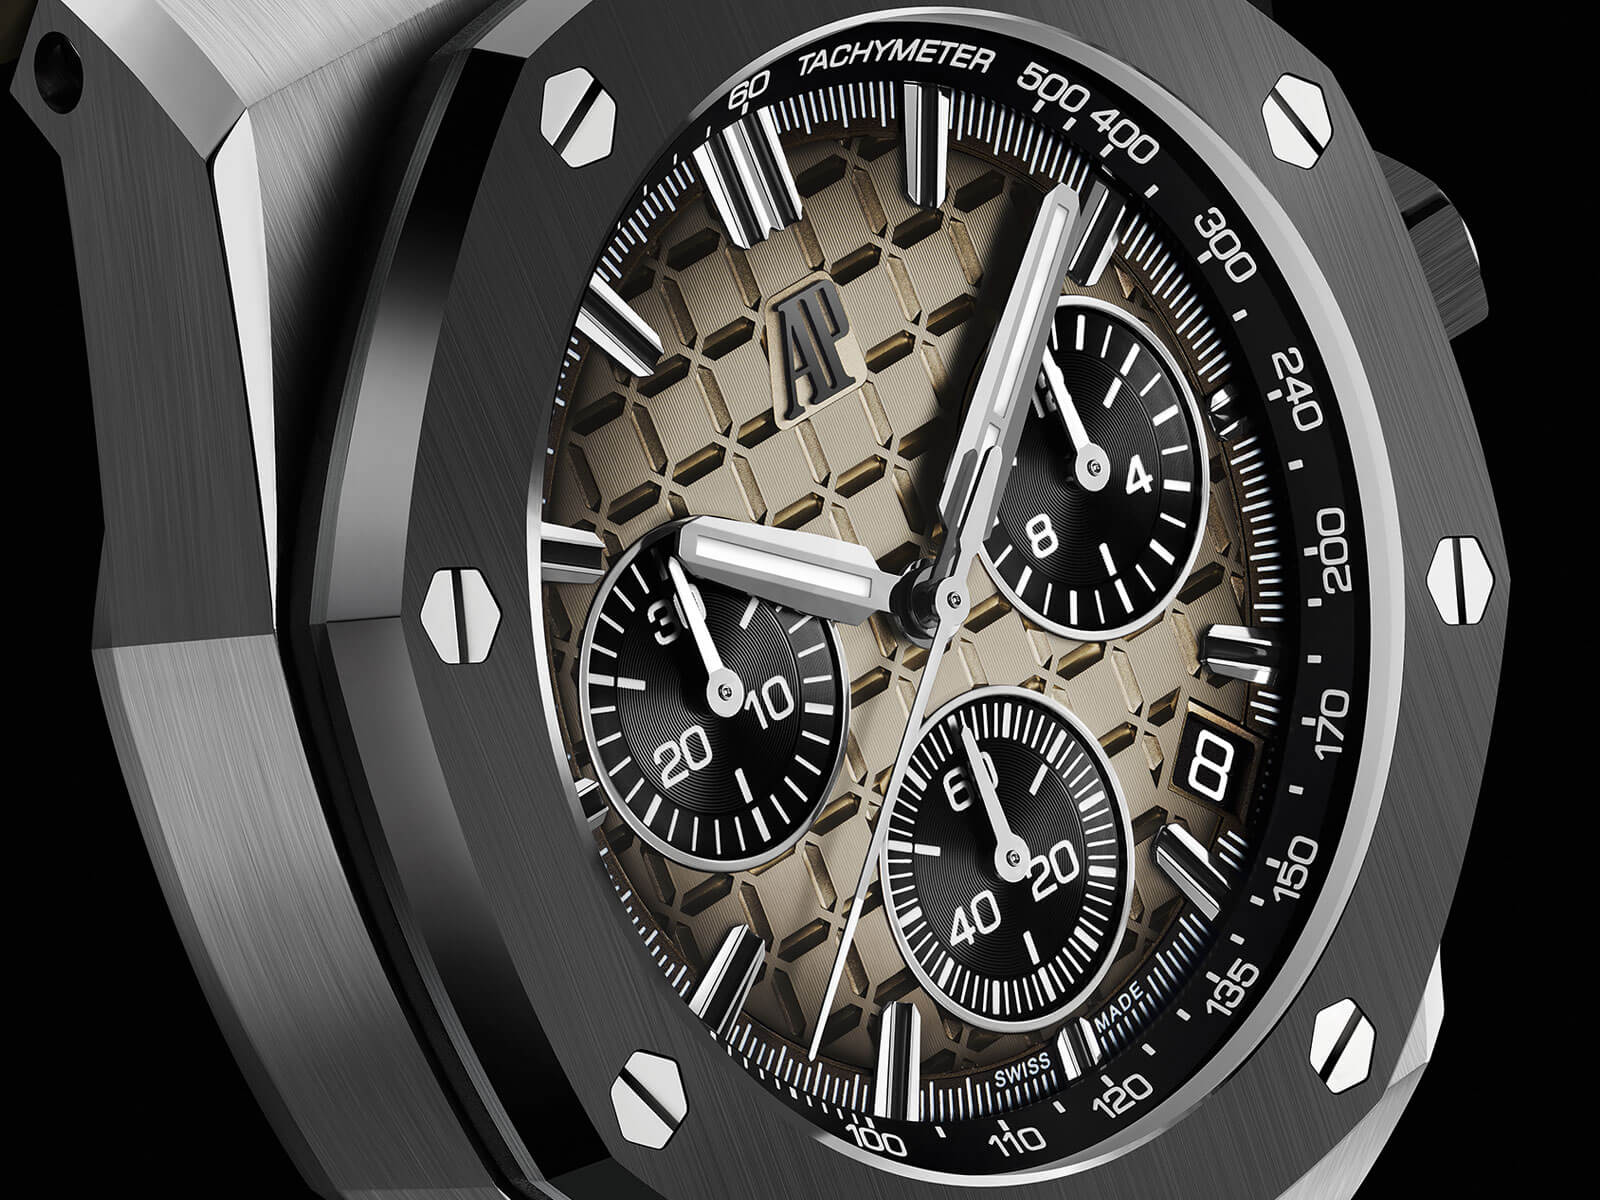 Audemars Piguet Royal Oak Offshore 26420SO-OO-A600CA-01 Chronograph with Flyback Function